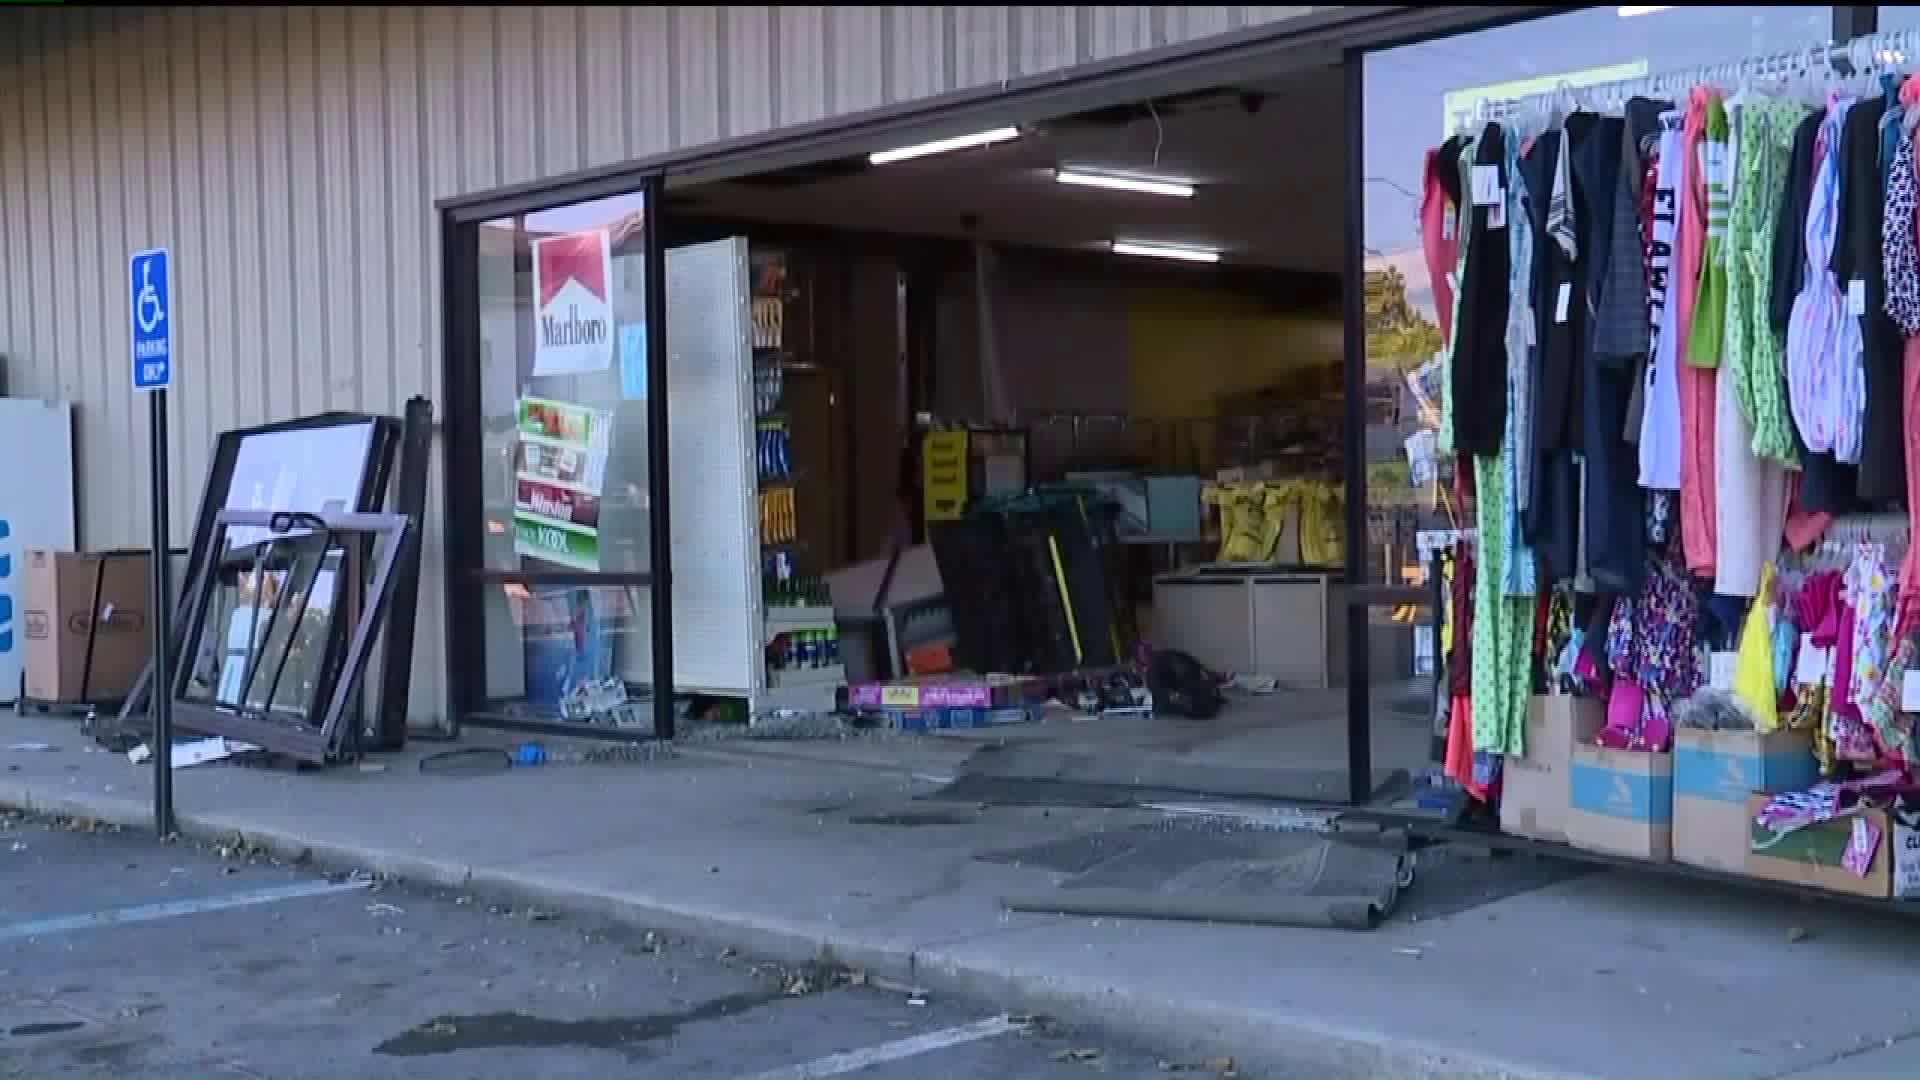 Dollar General Plans to Reopen After Car Crashed into Storefront